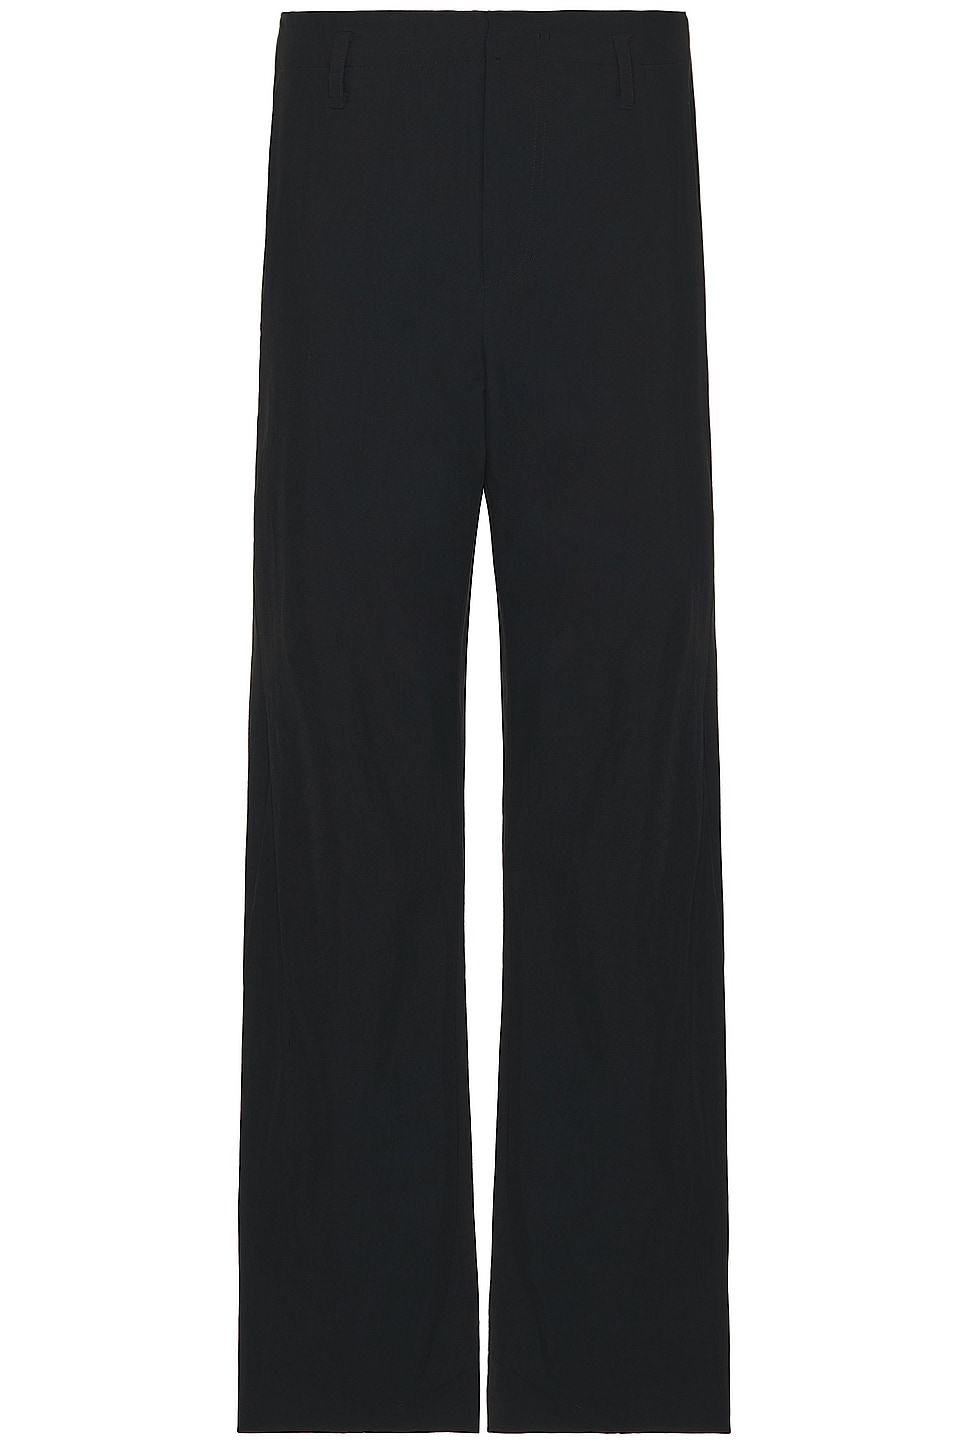 Image 1 of POST ARCHIVE FACTION (PAF) 6.0 Trousers in Black